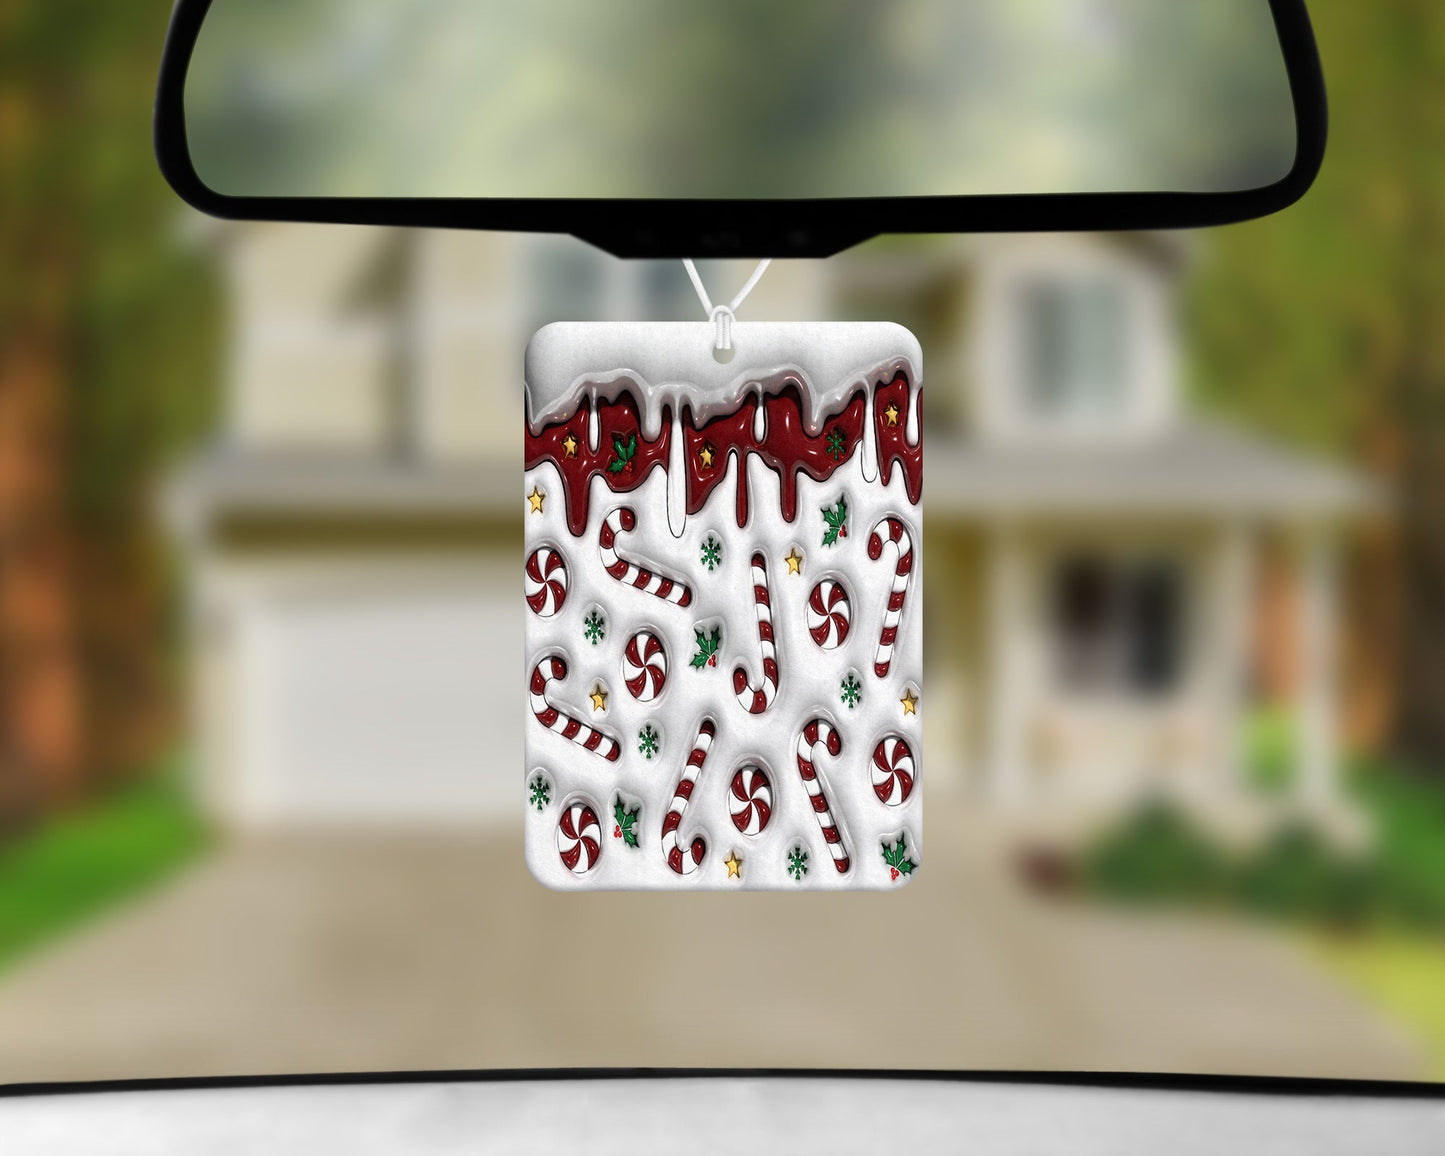 Candy Canes|Freshie|Includes Scent Bottle - Vehicle Air Freshener